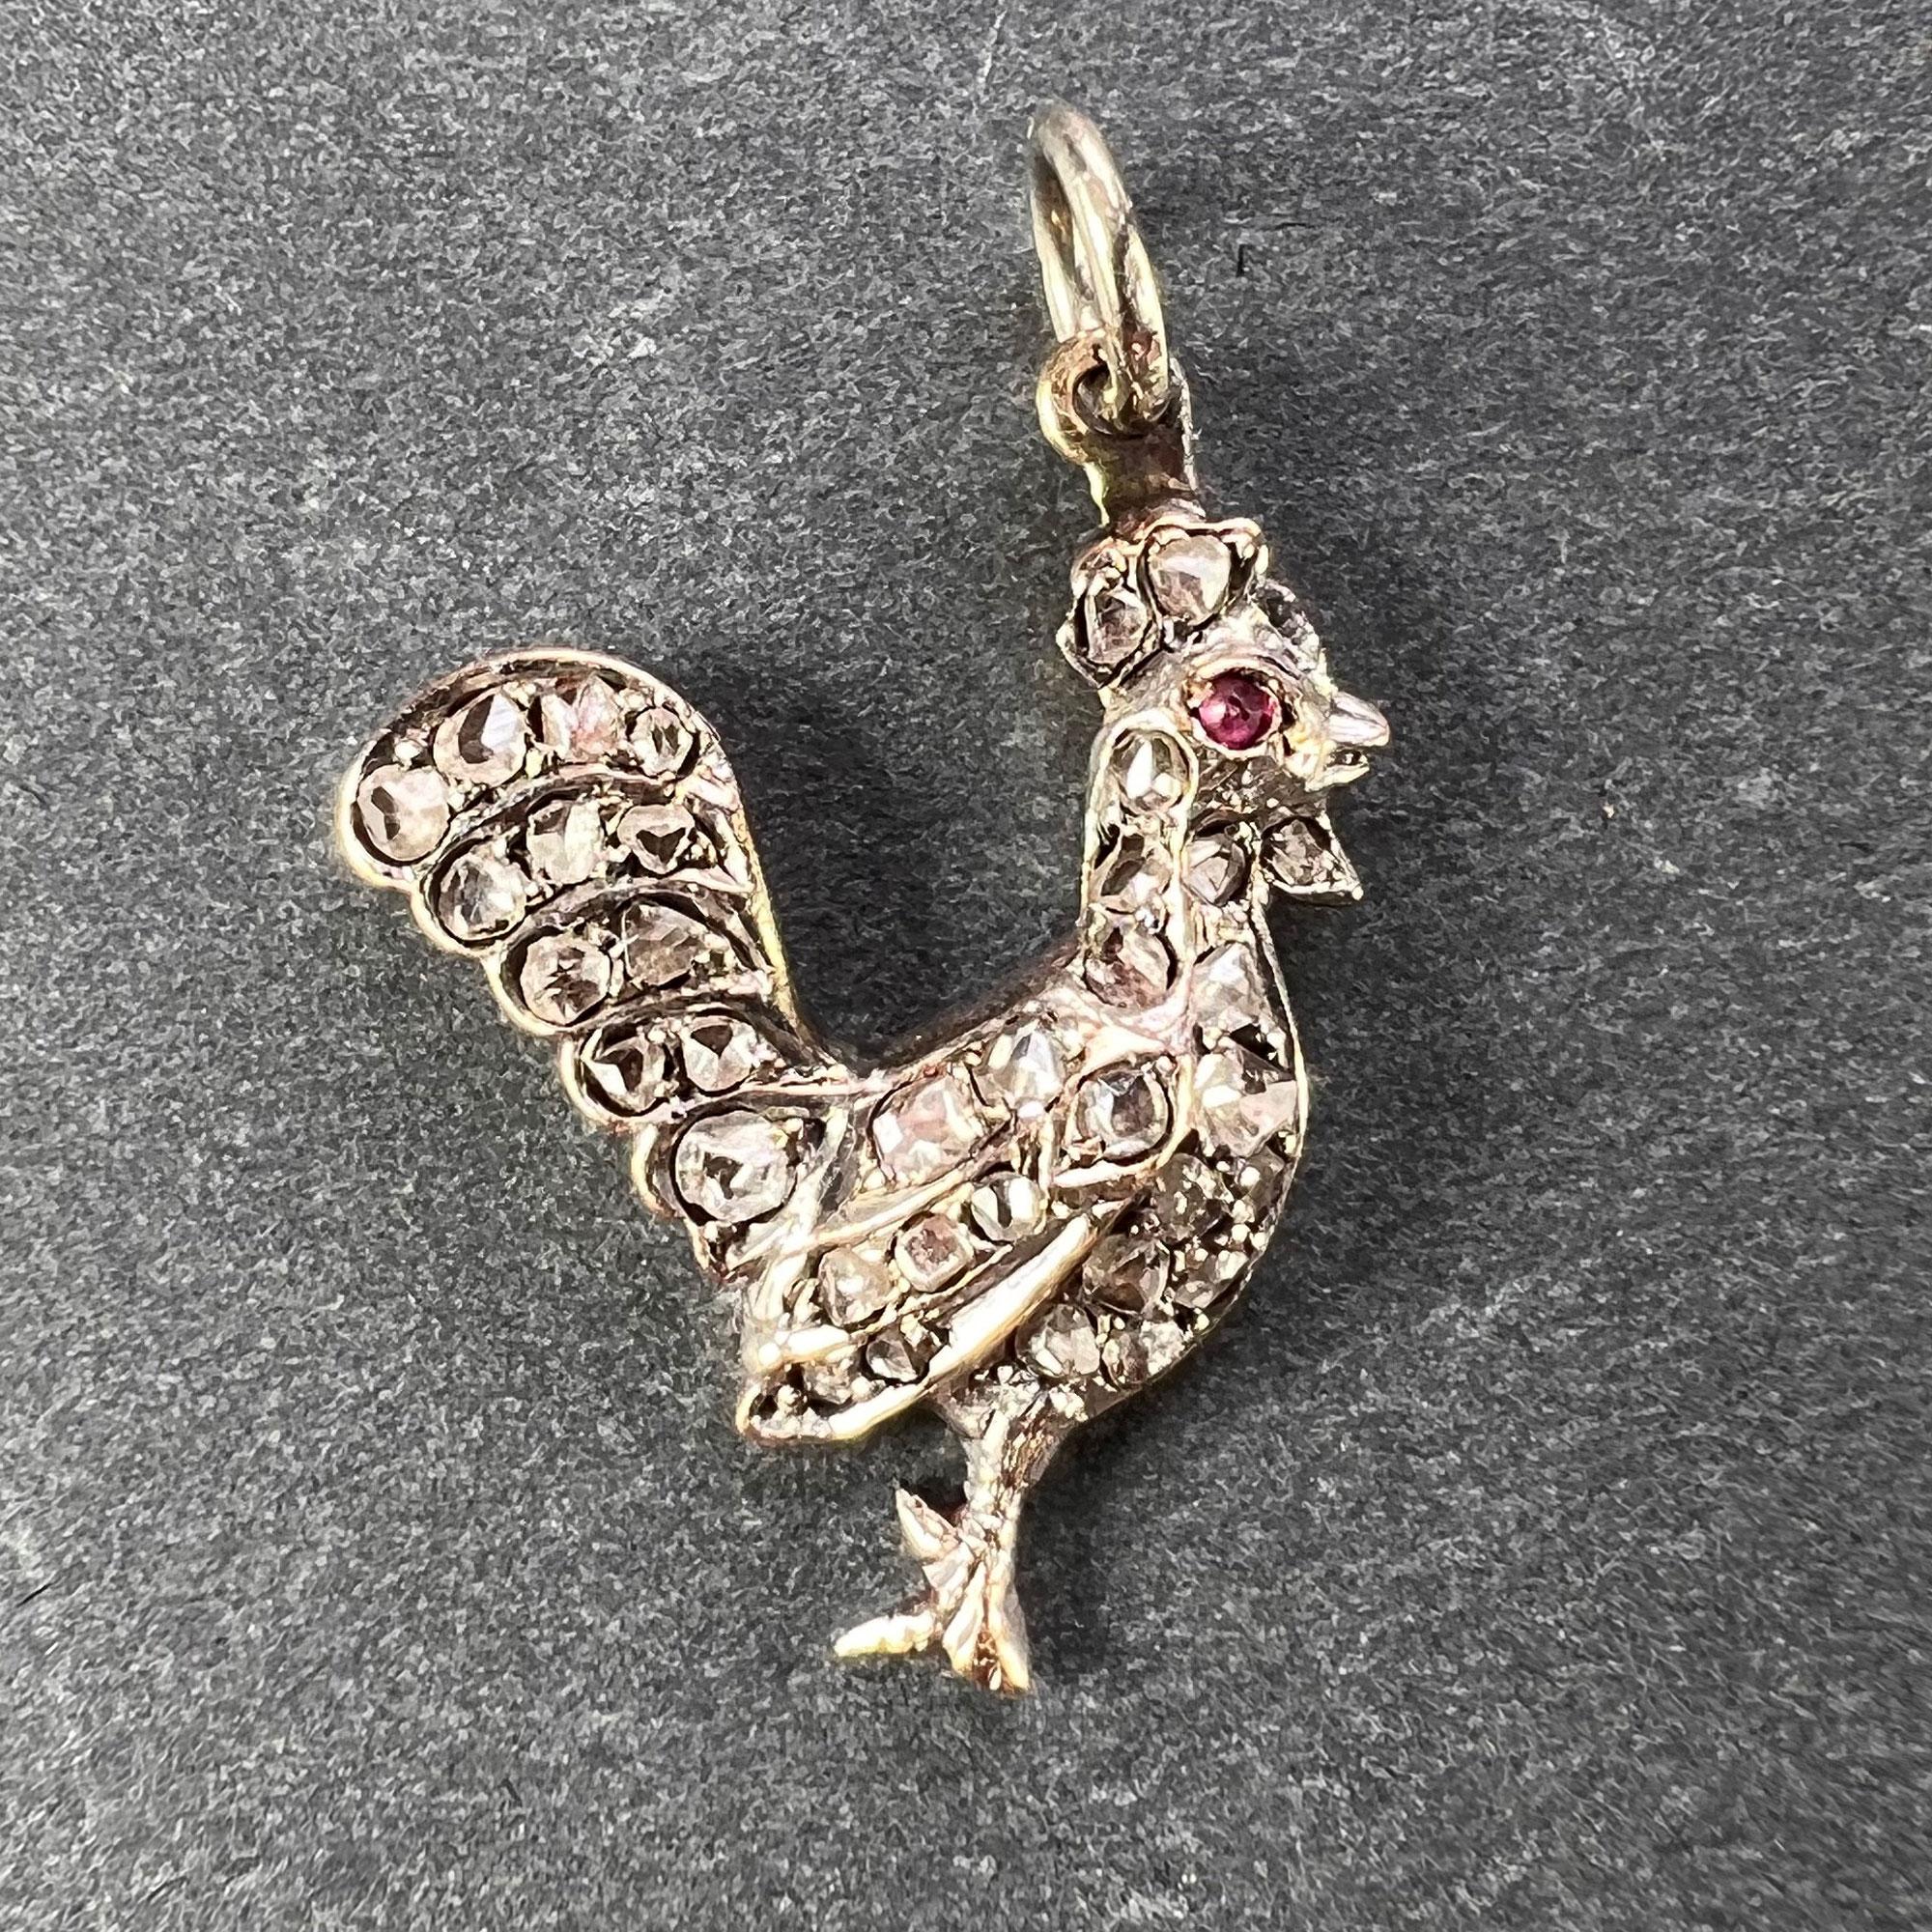 An antique charm pendant designed as a rooster in gold and silver set with 35 rose-cut diamonds with an estimated total weight of 0.35 carats and a cabochon ruby eye. Unmarked but tested as 18 karat (18K) rose gold with scratch numbers to the